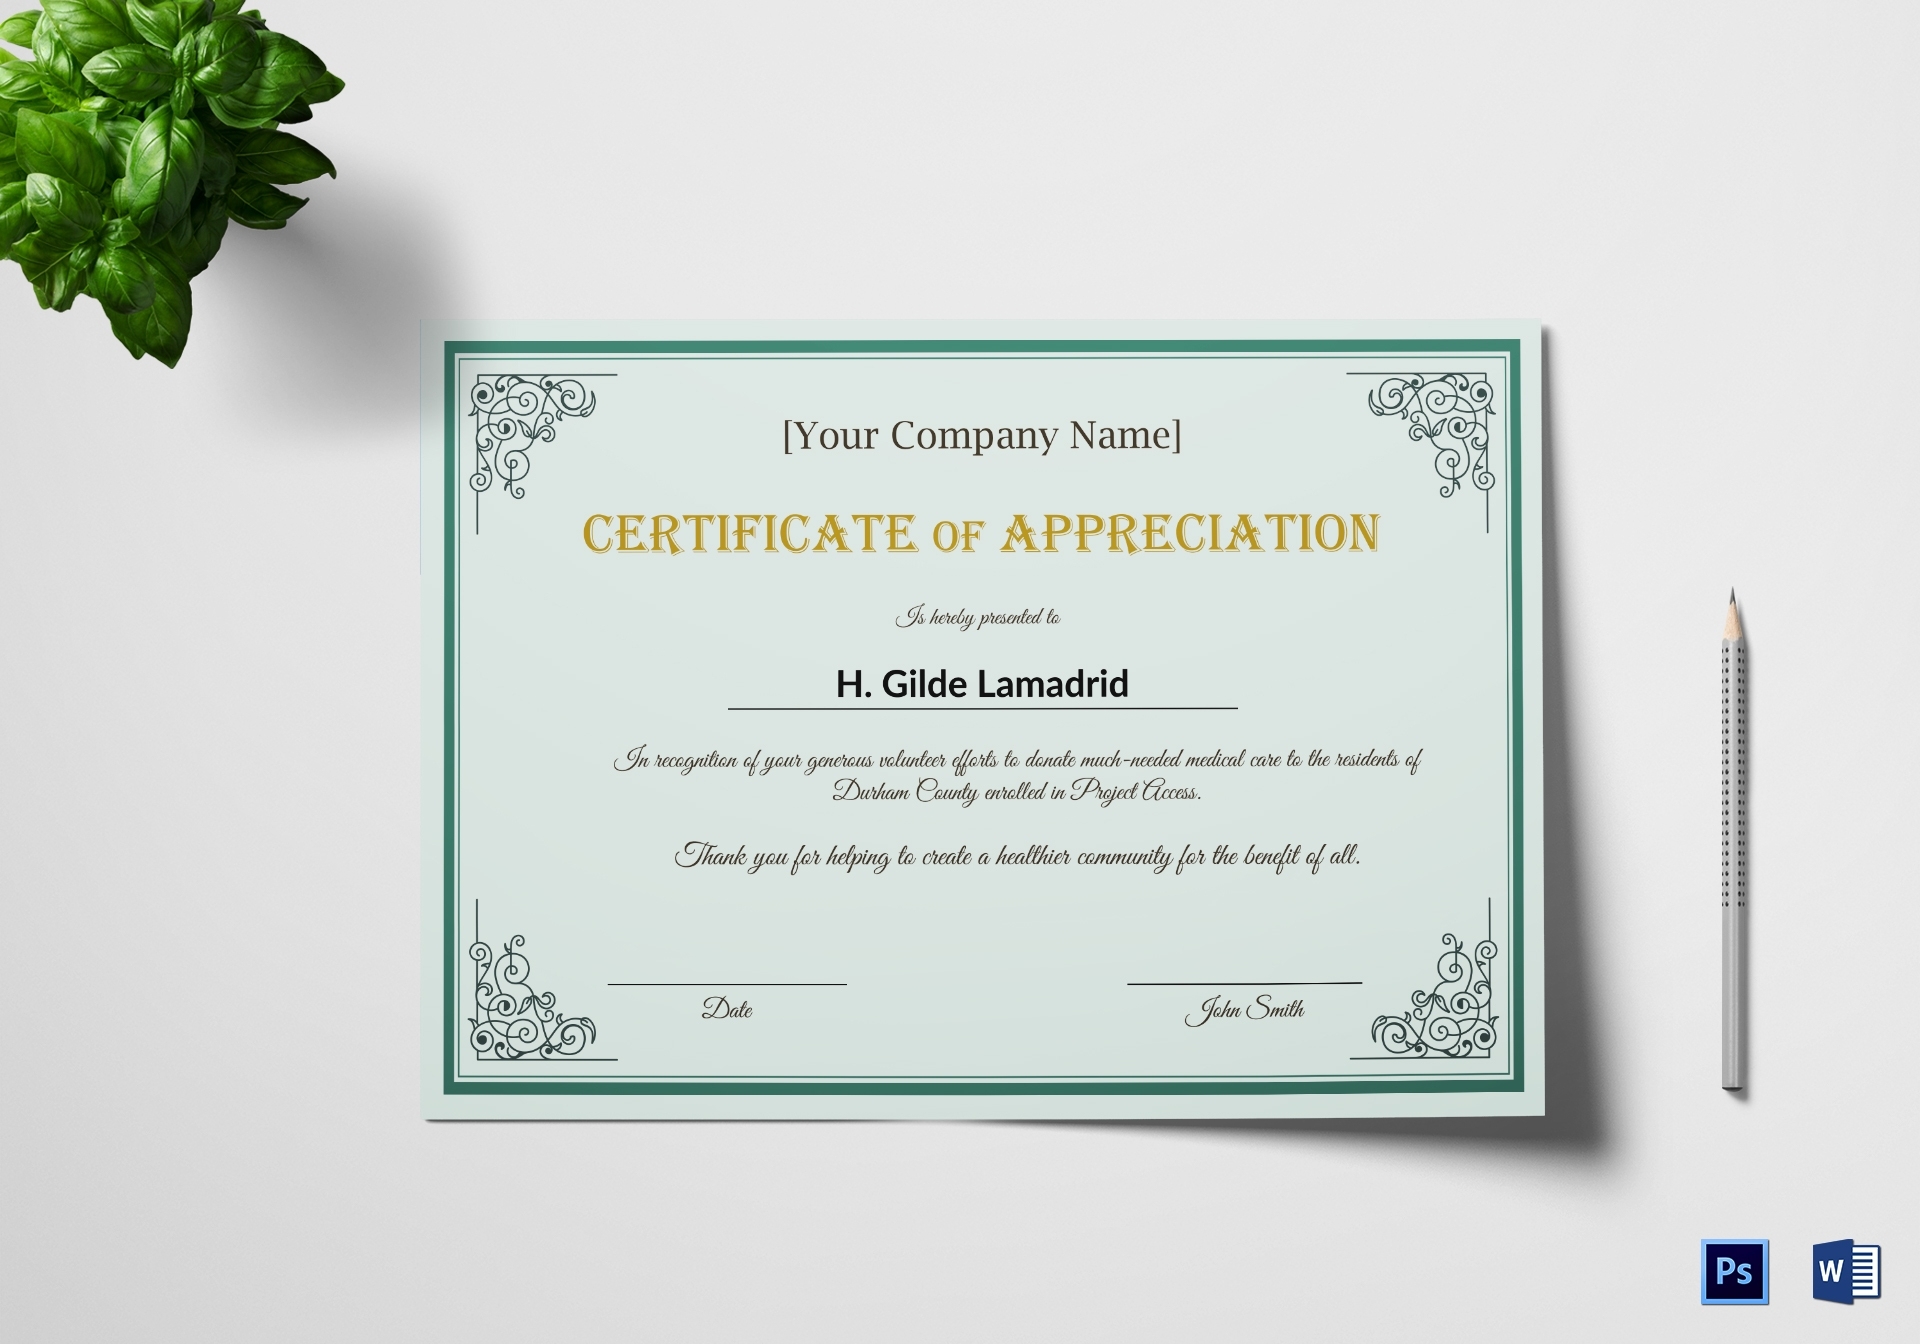 Company Employee Appreciation Certificate Design Template In Psd, Word Regarding Template For Recognition Certificate